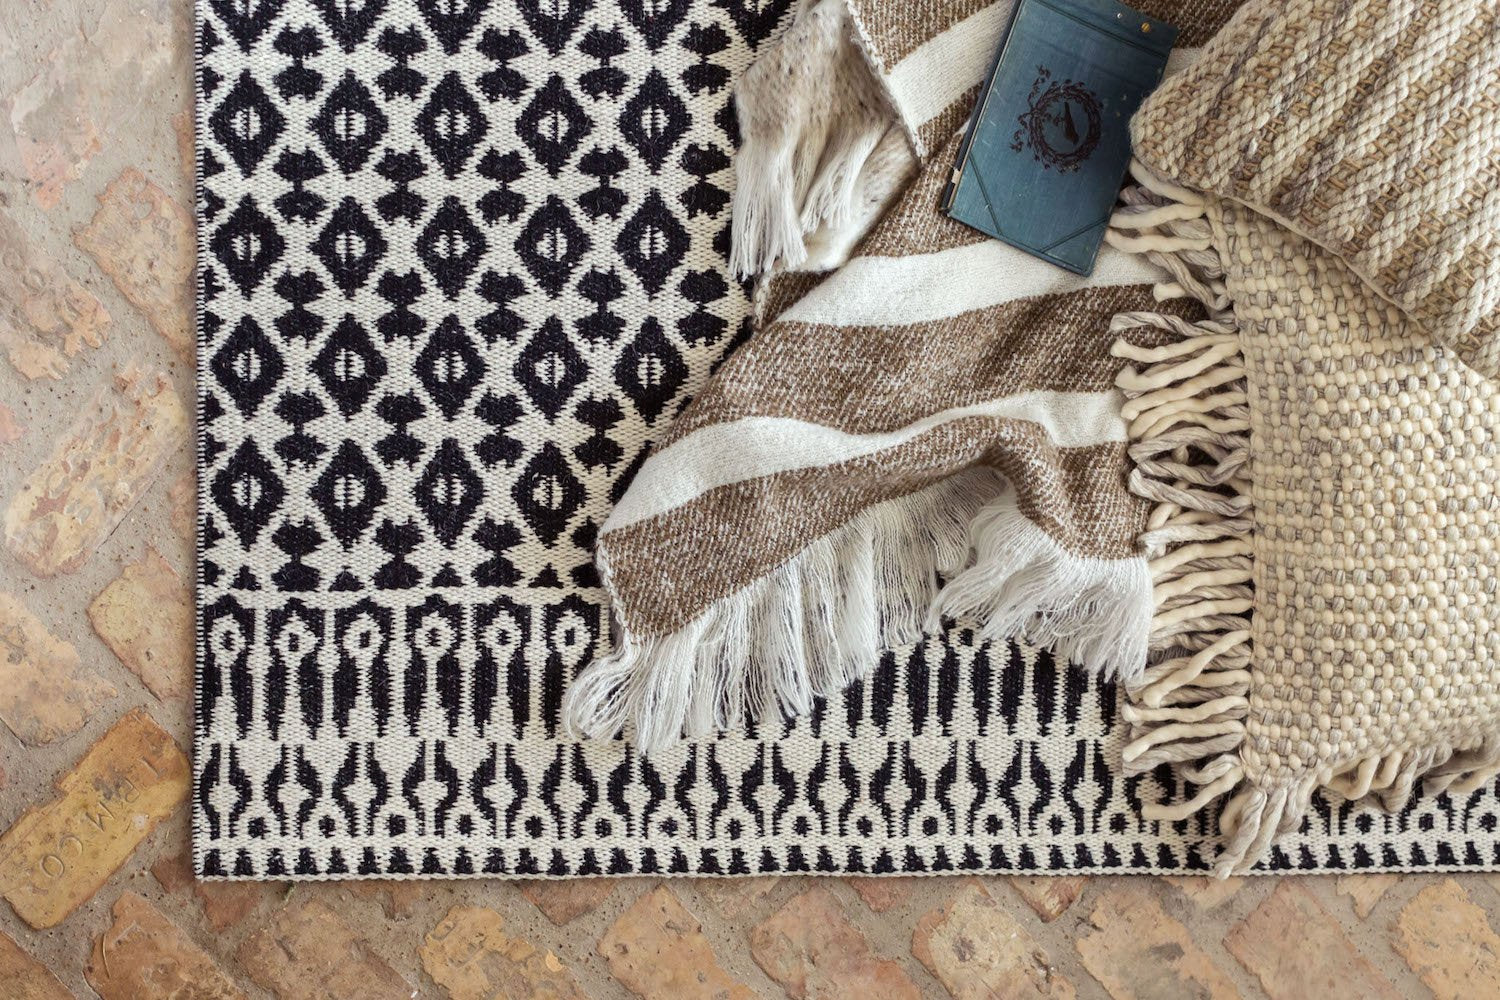 Pull the Rug Out: Five Tips for Buying A Vintage Rug